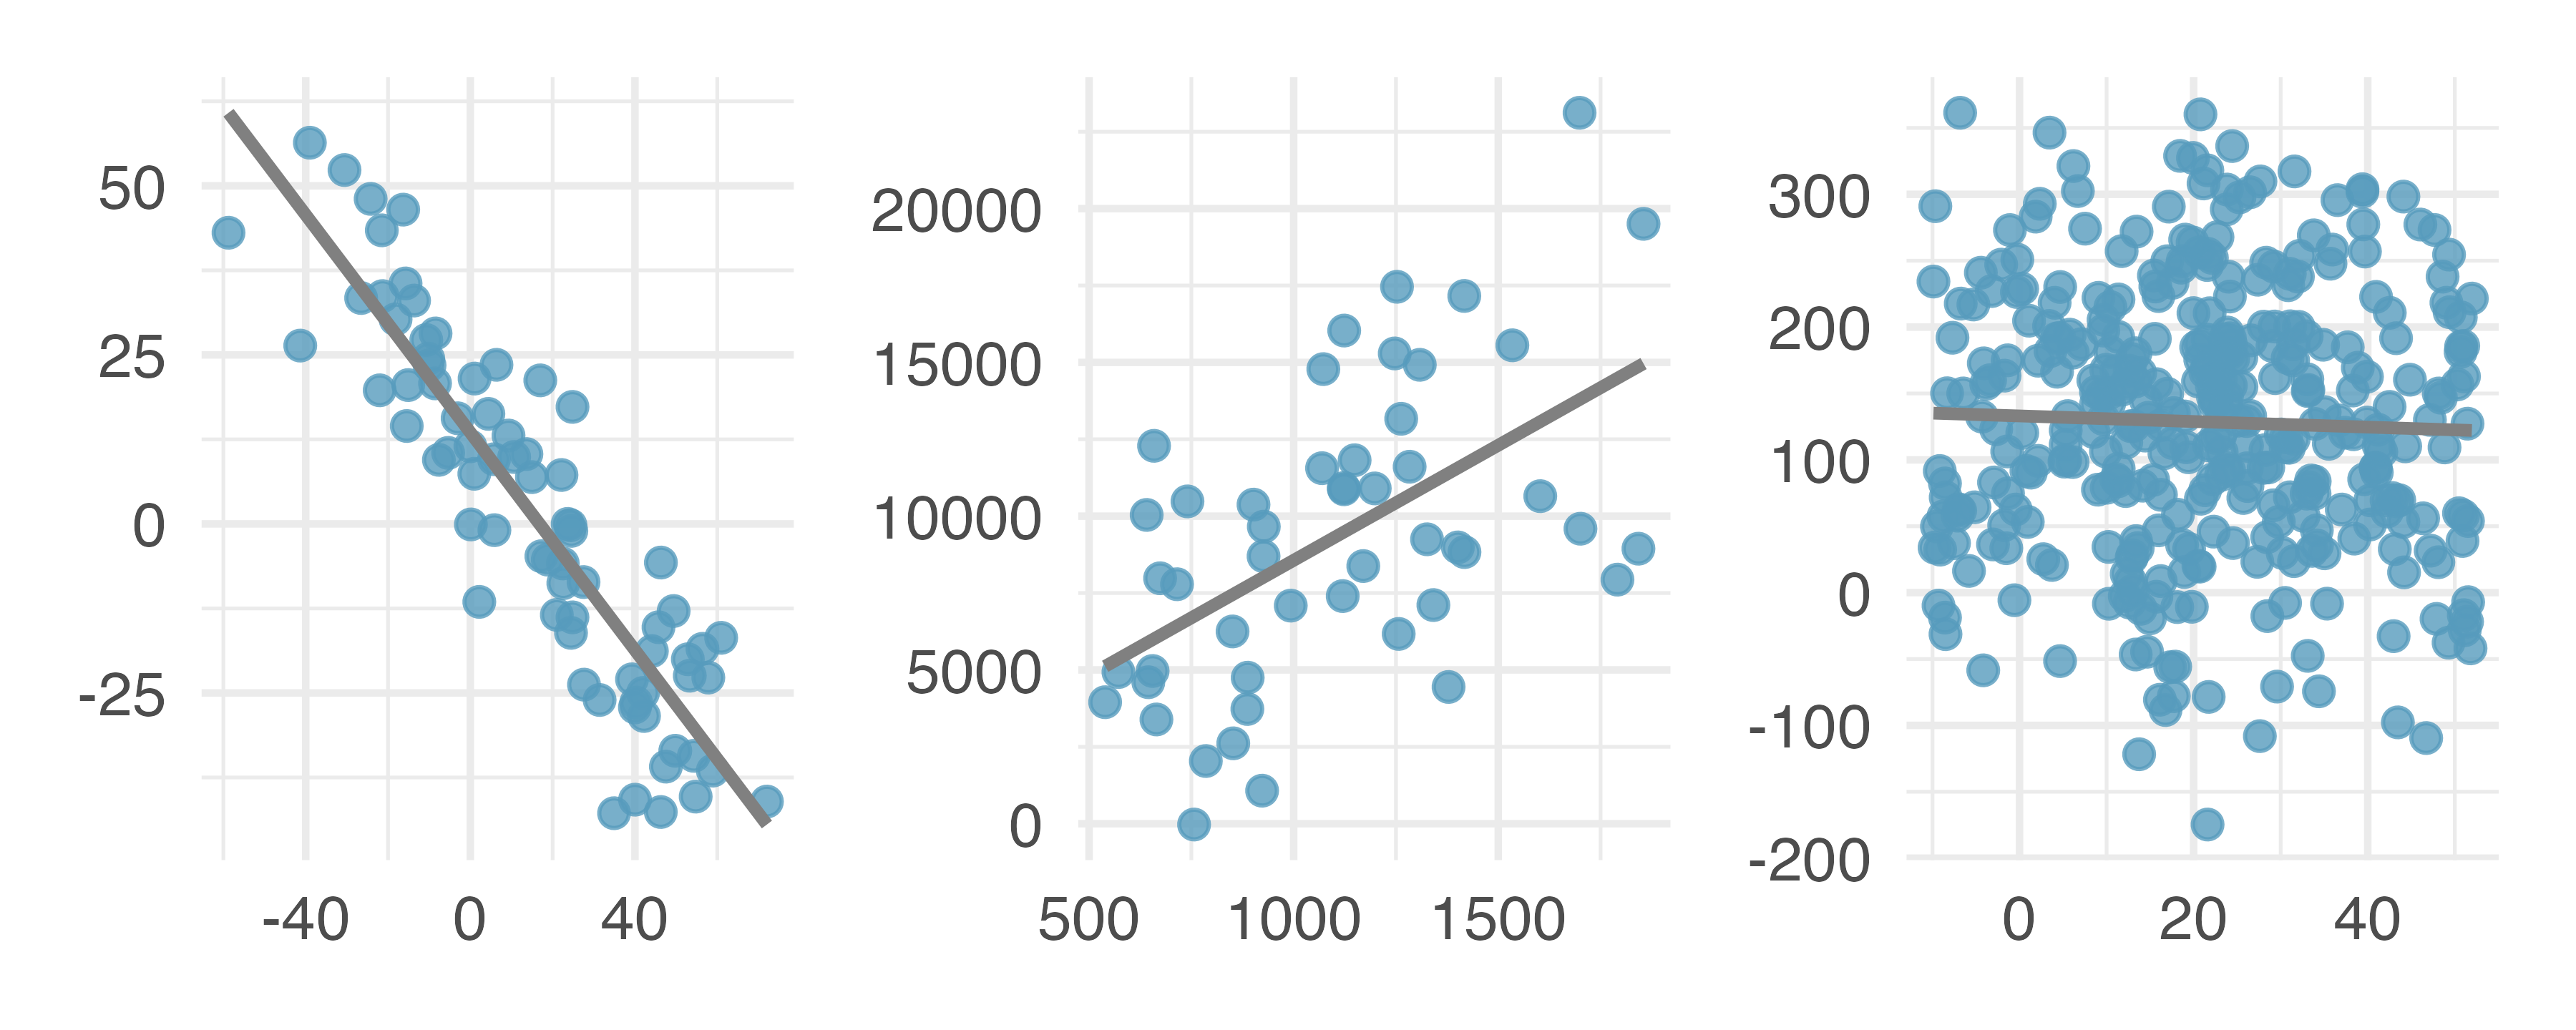 Three scatterplots with fabricated data.  The first panel shows a strong negative linear relationship.  The second panel shows a moderate positive linear relationship.  The last panel shows no relationship between the x and y variables.